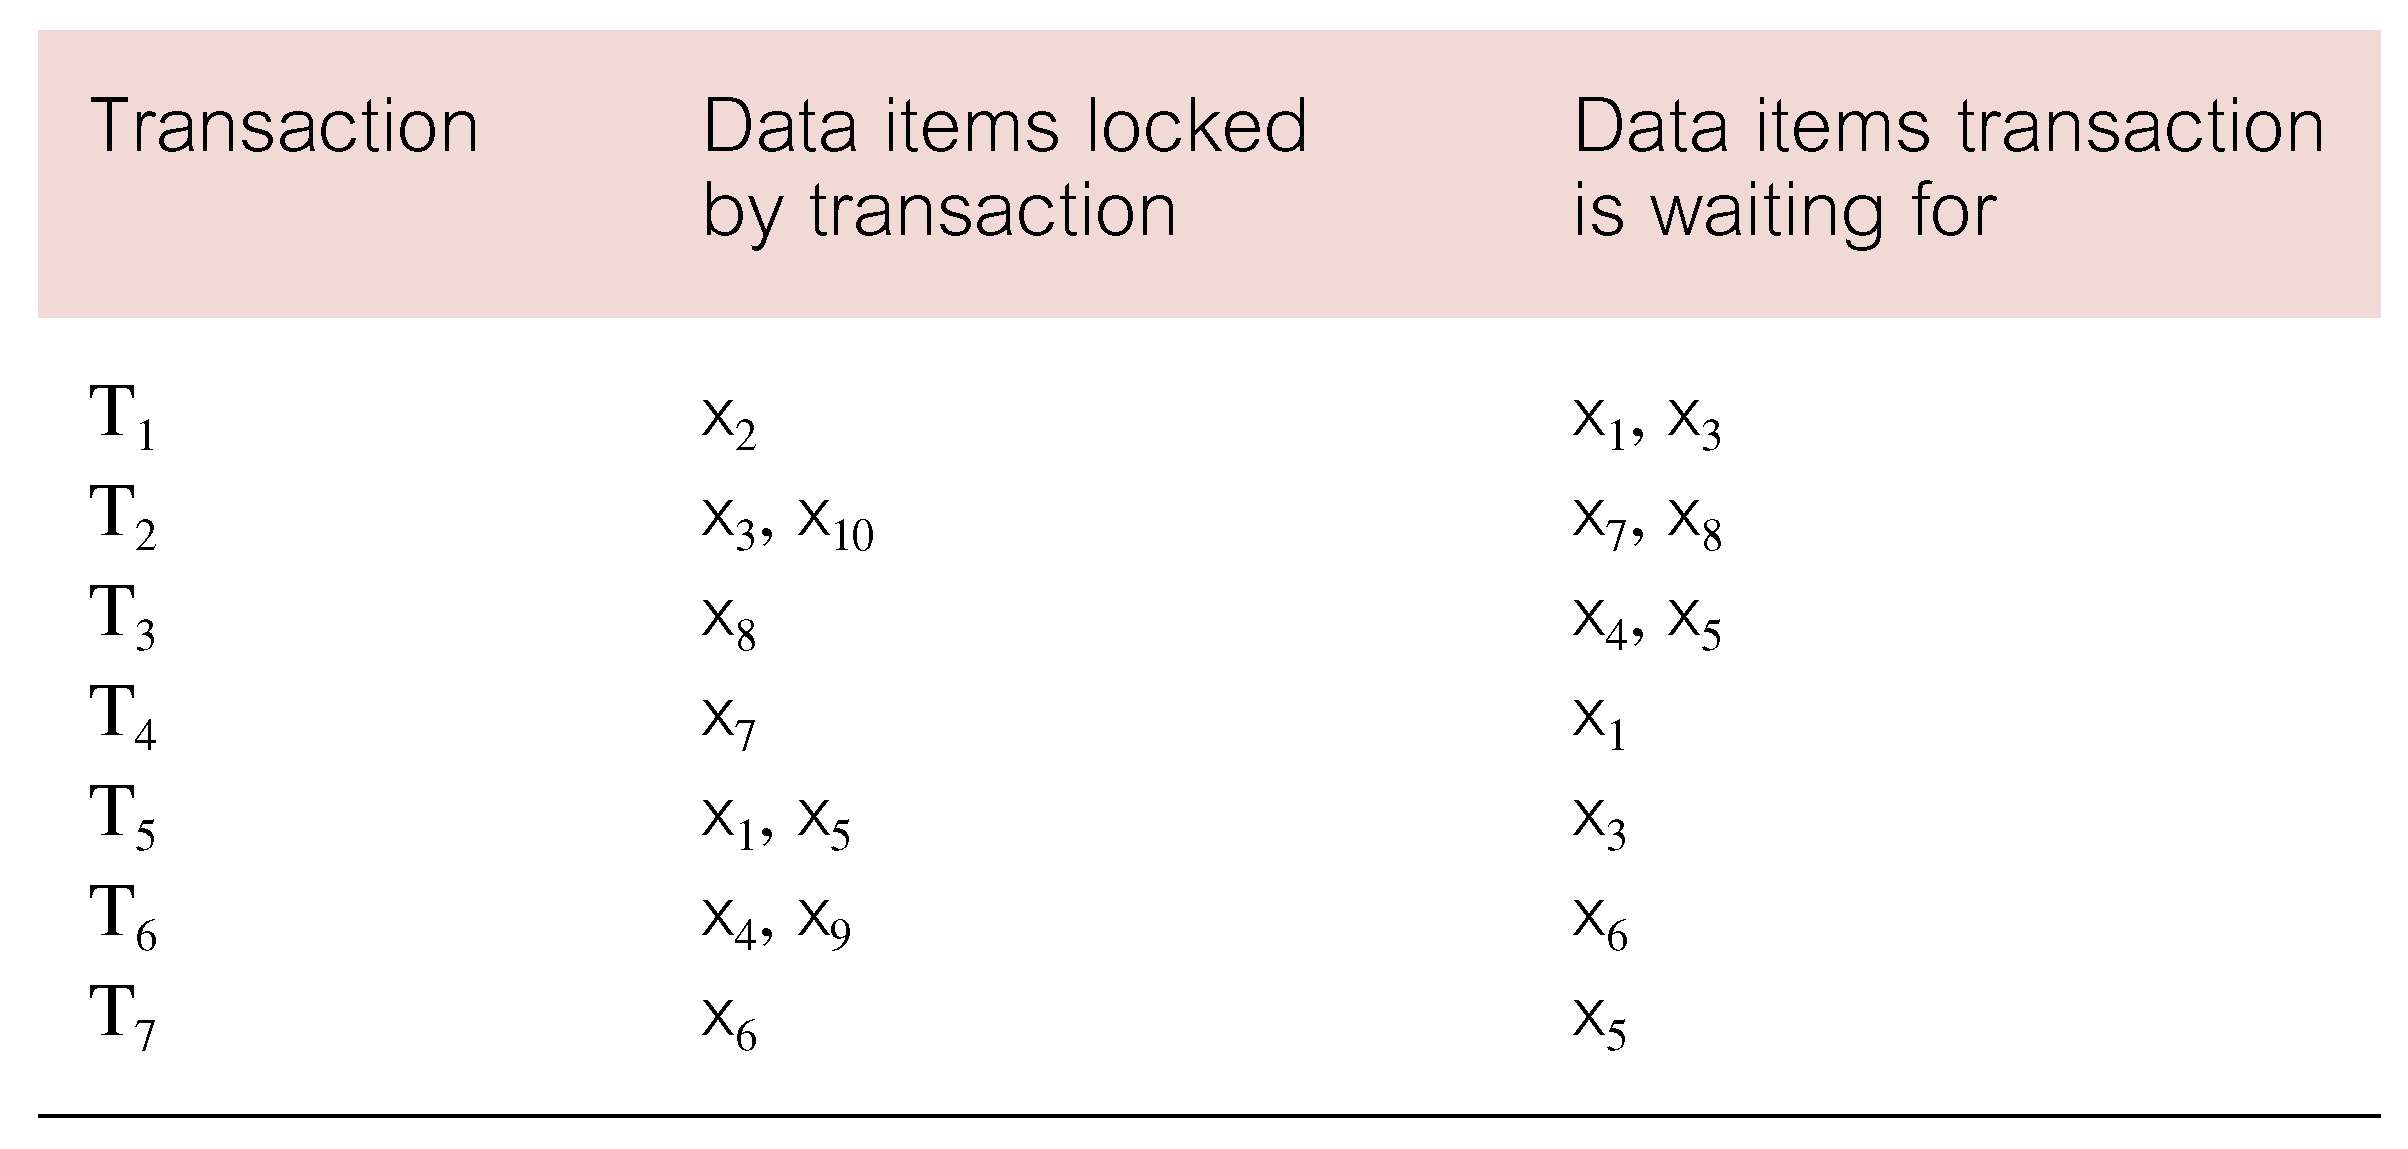 Produce a wait-for-graph for the following transaction scenario and determine